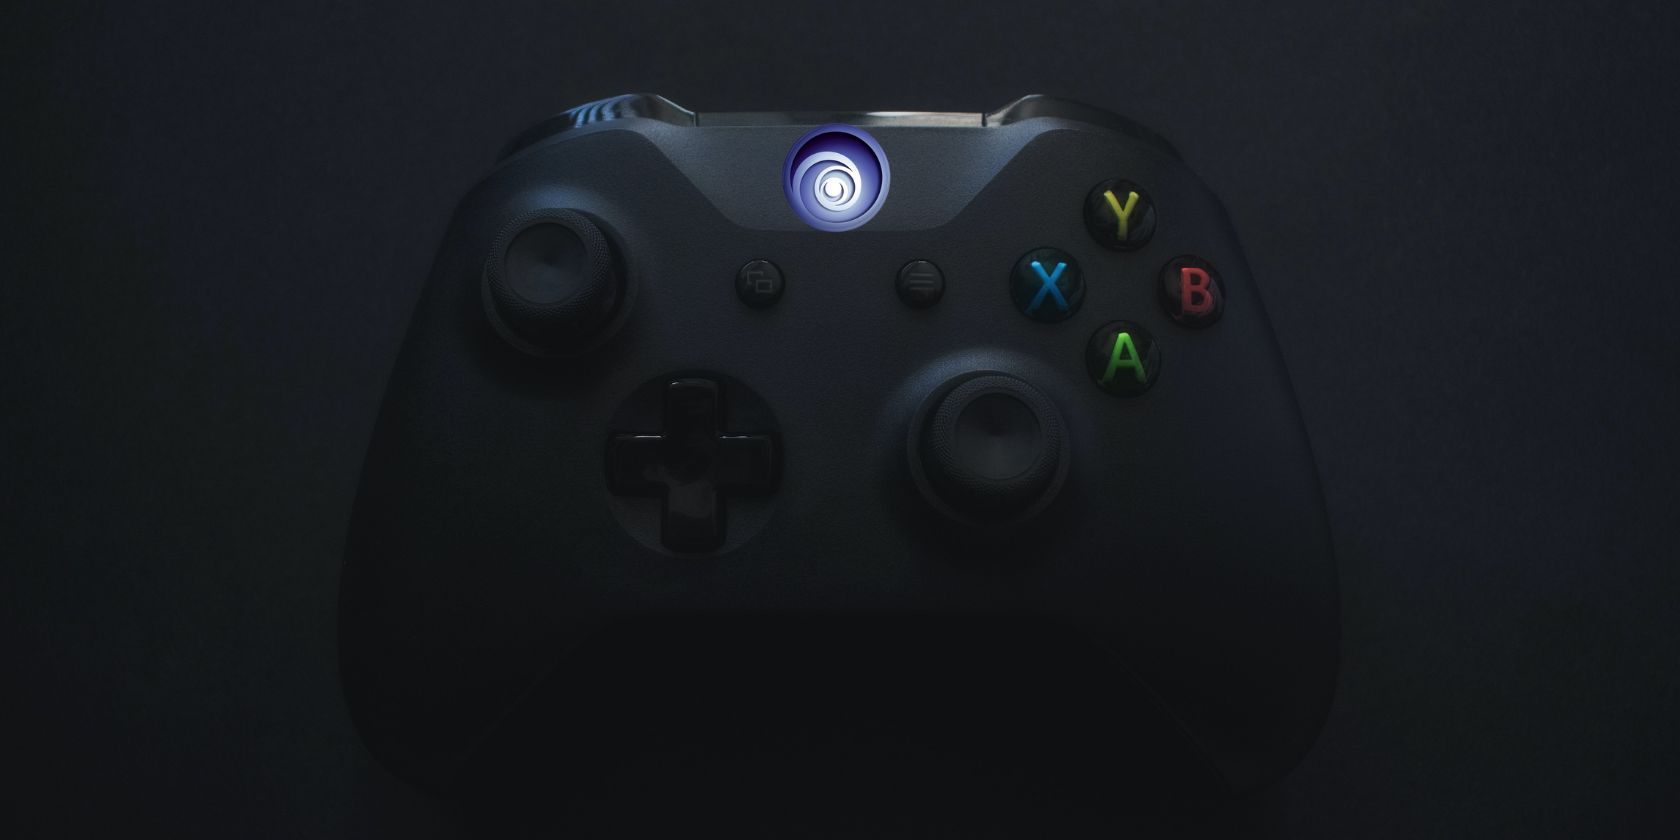 An Xbox controller with the Ubisoft logo in place of the Xbox 